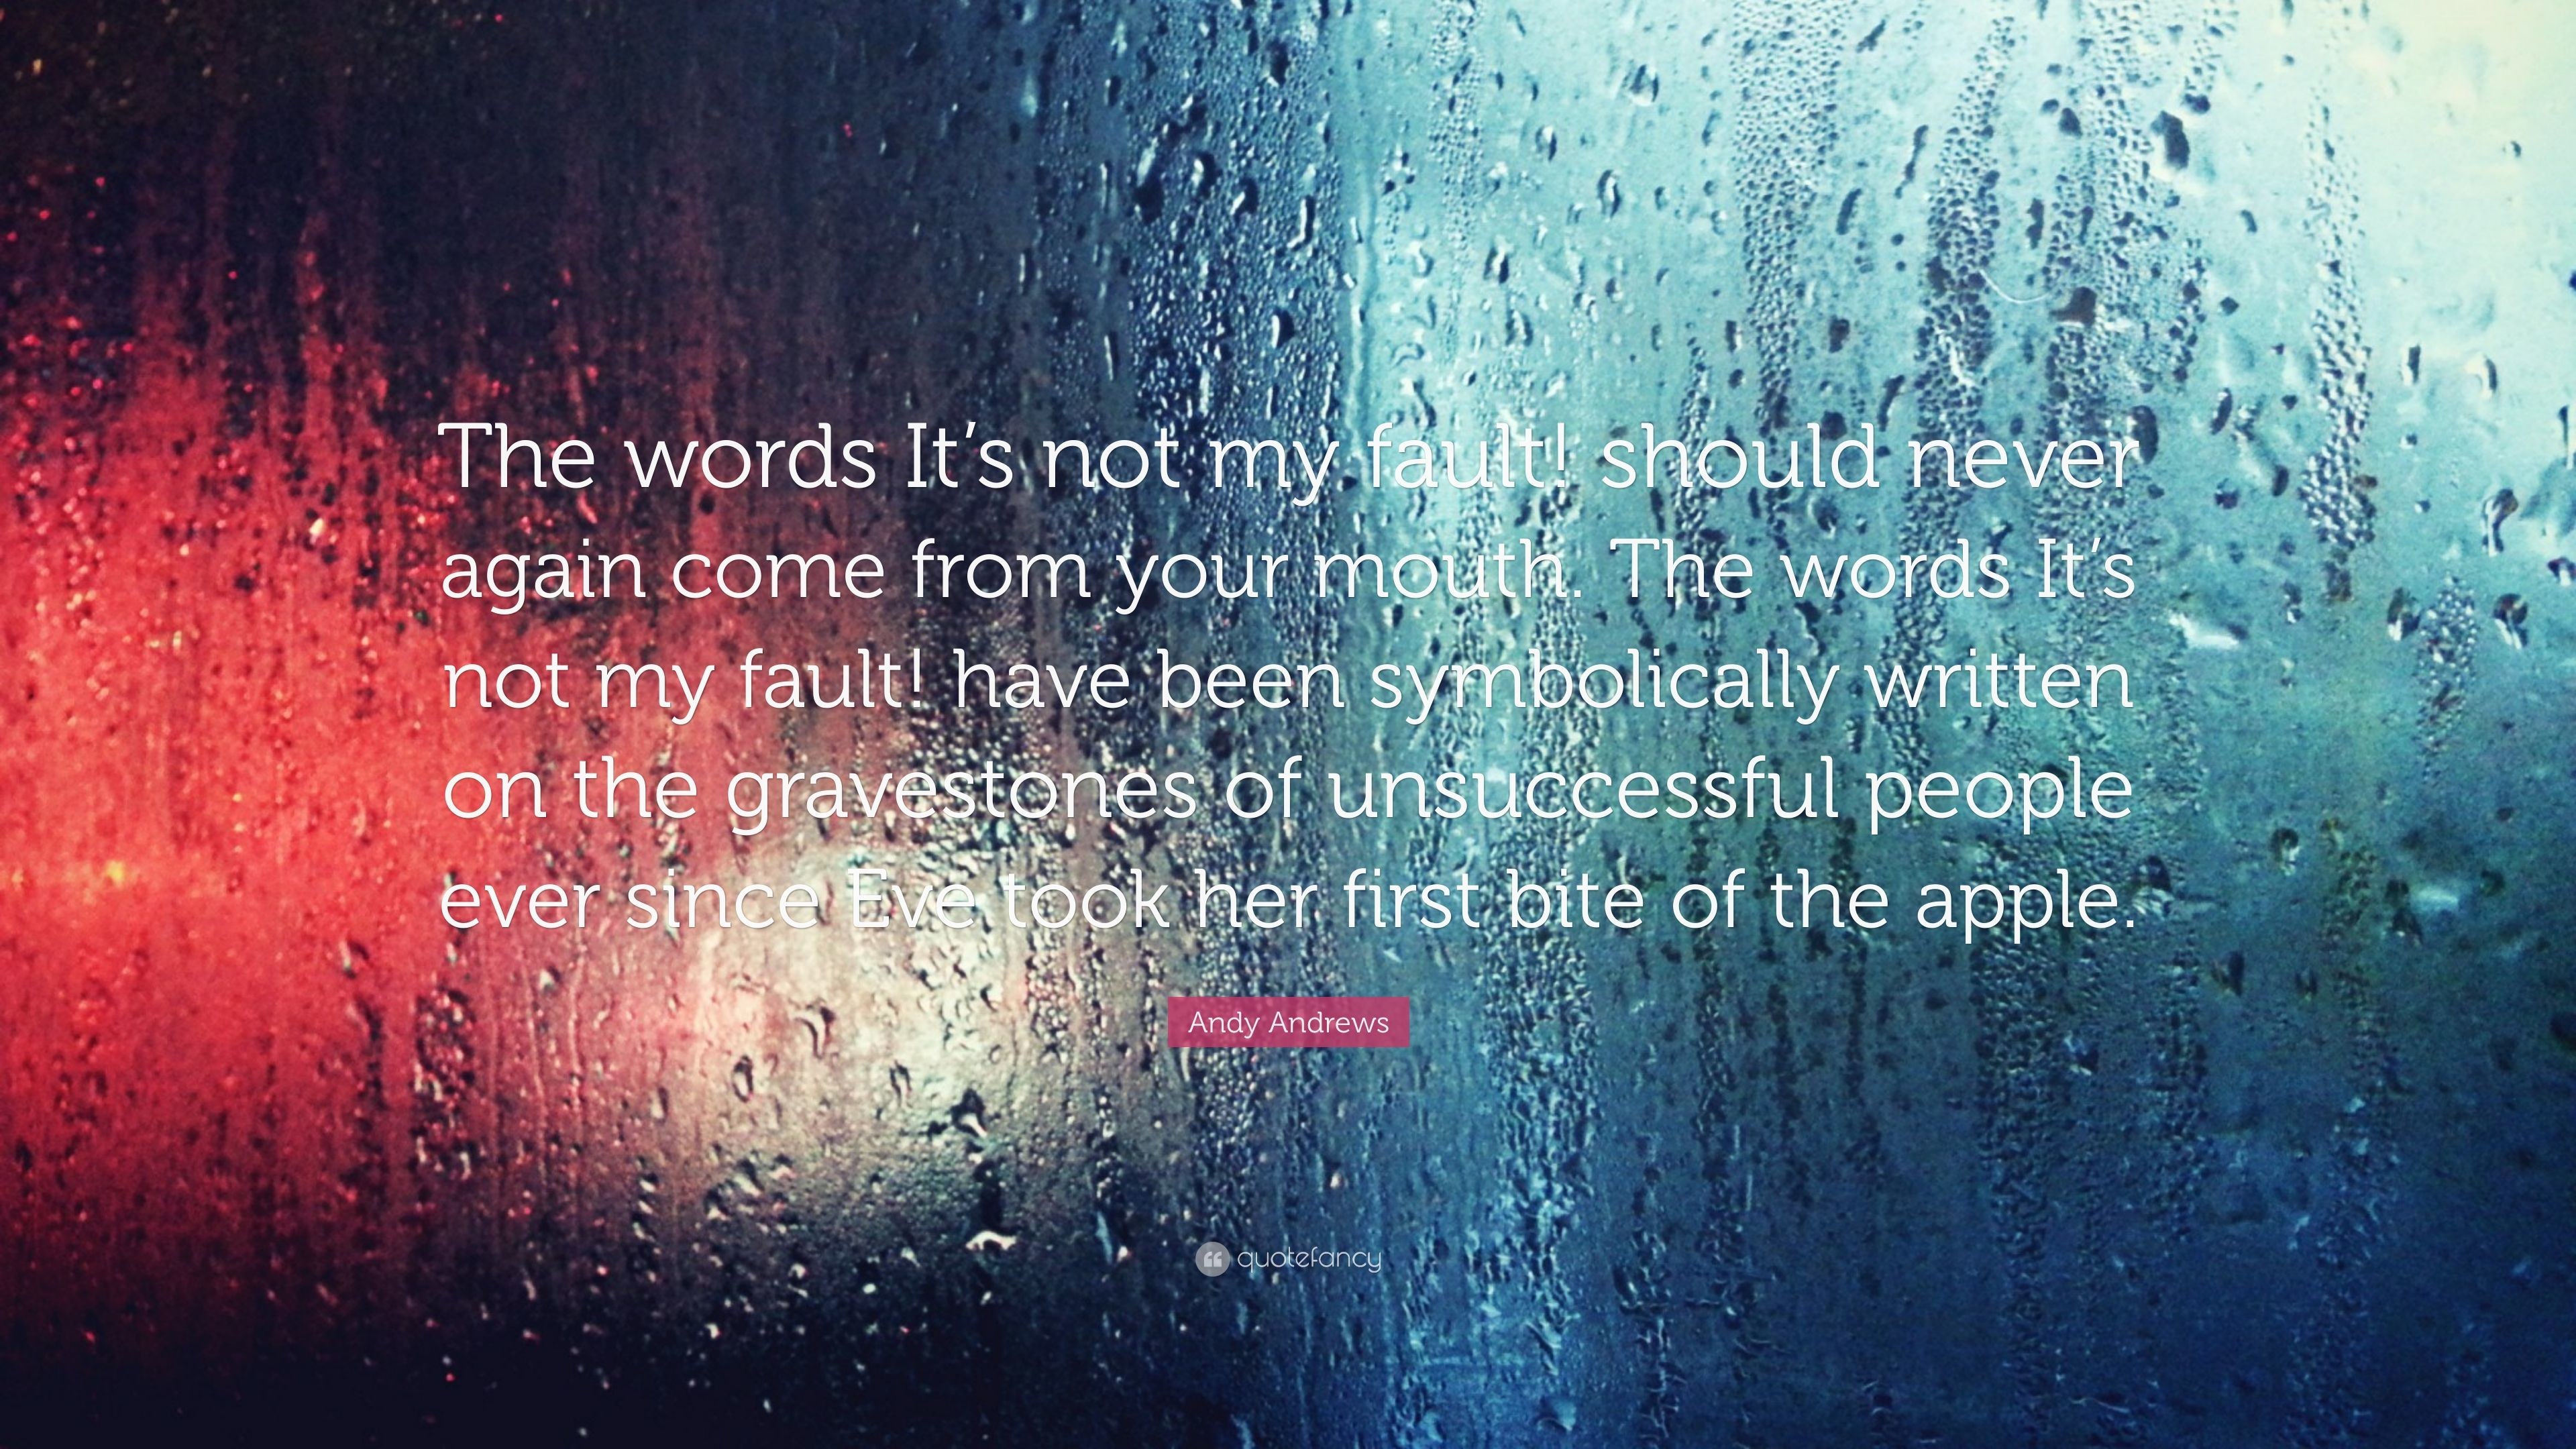 3840x2160 Andy Andrews Quote: “The words It's not my fault! should never again come